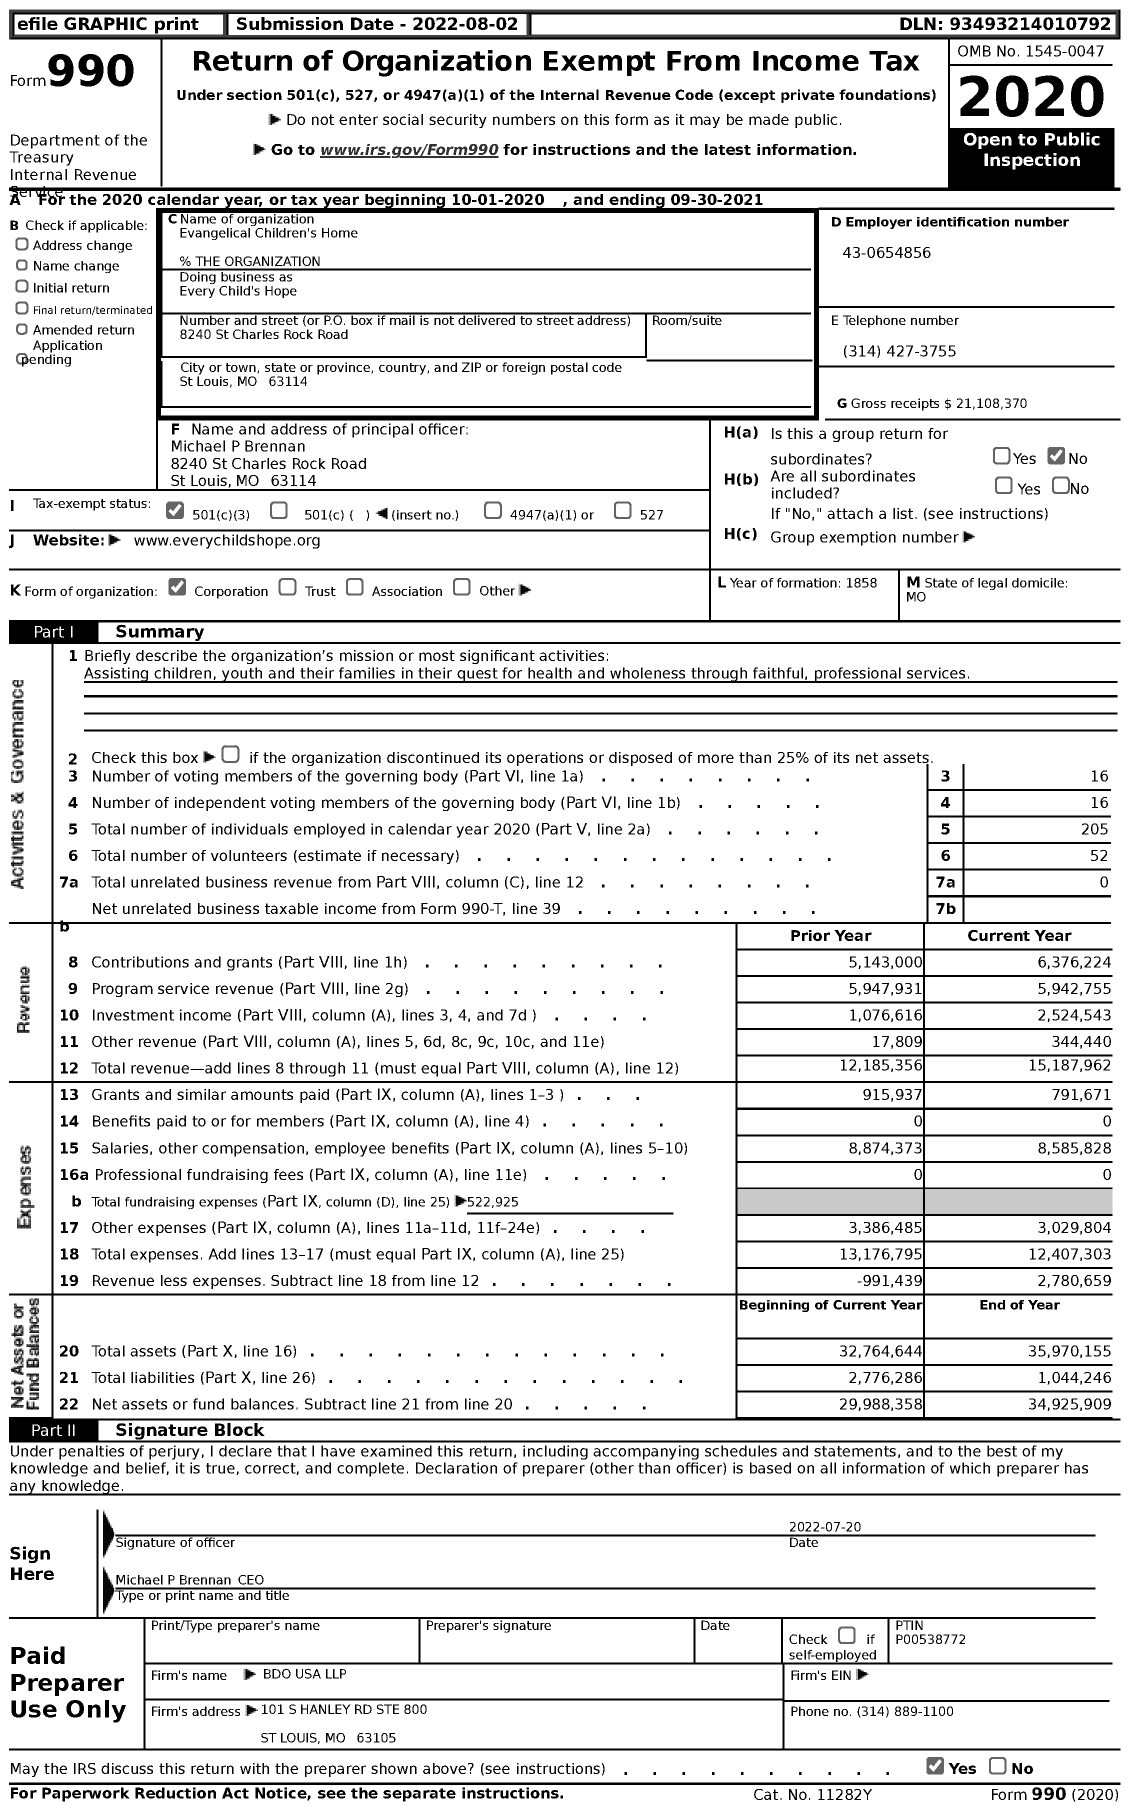 Image of first page of 2020 Form 990 for Evangelical Children's Home (ECH)